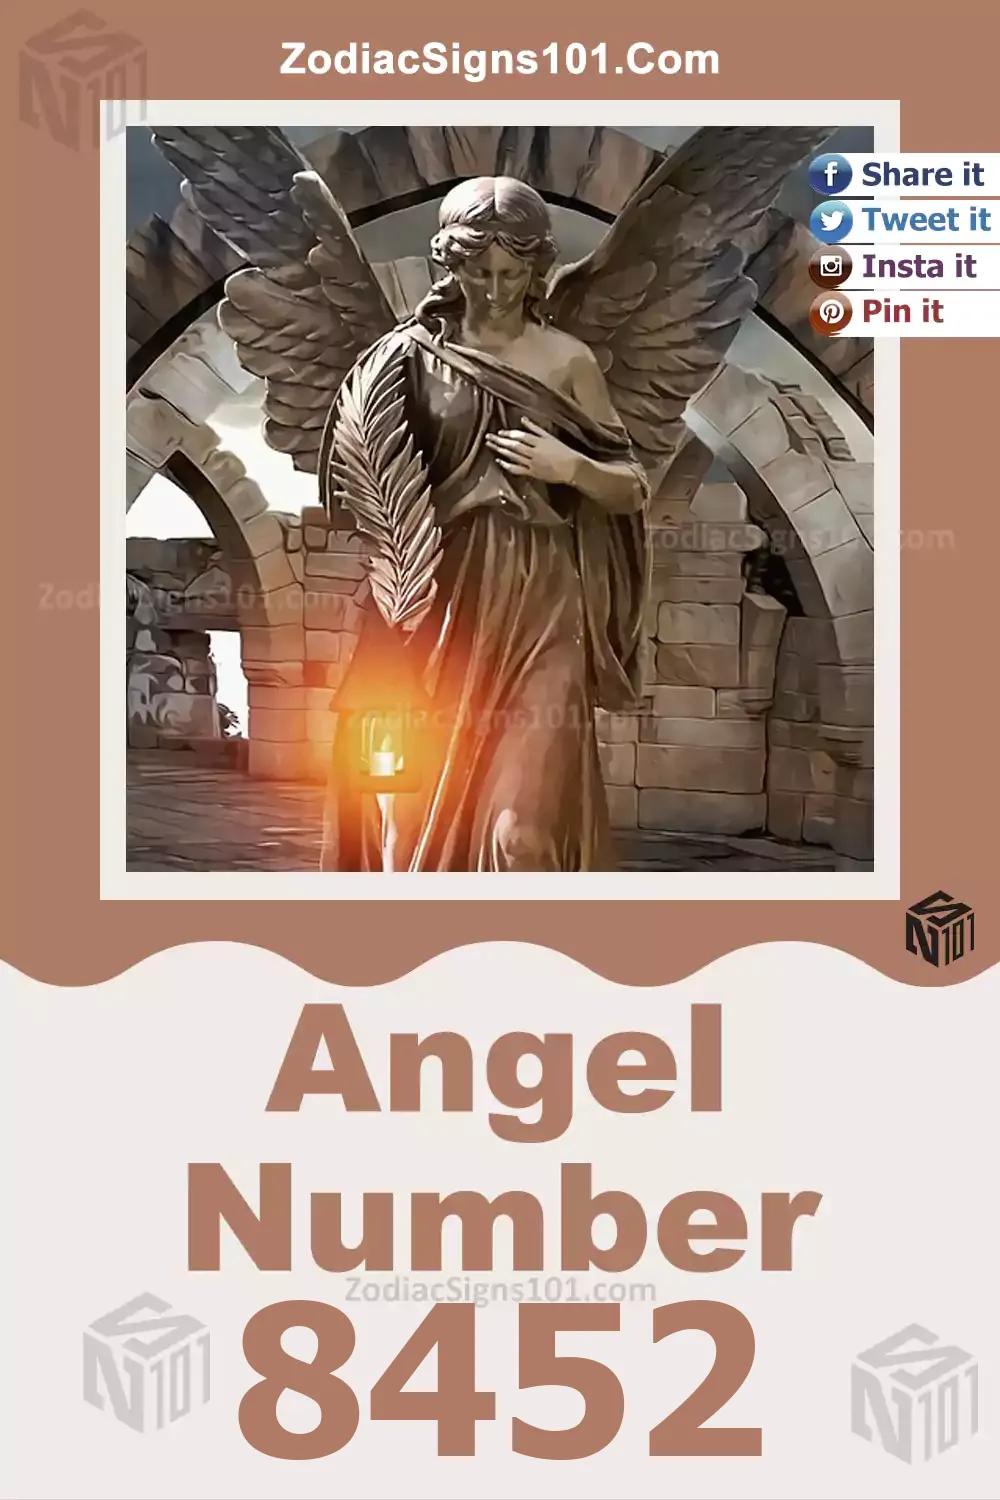 8452 Angel Number Meaning